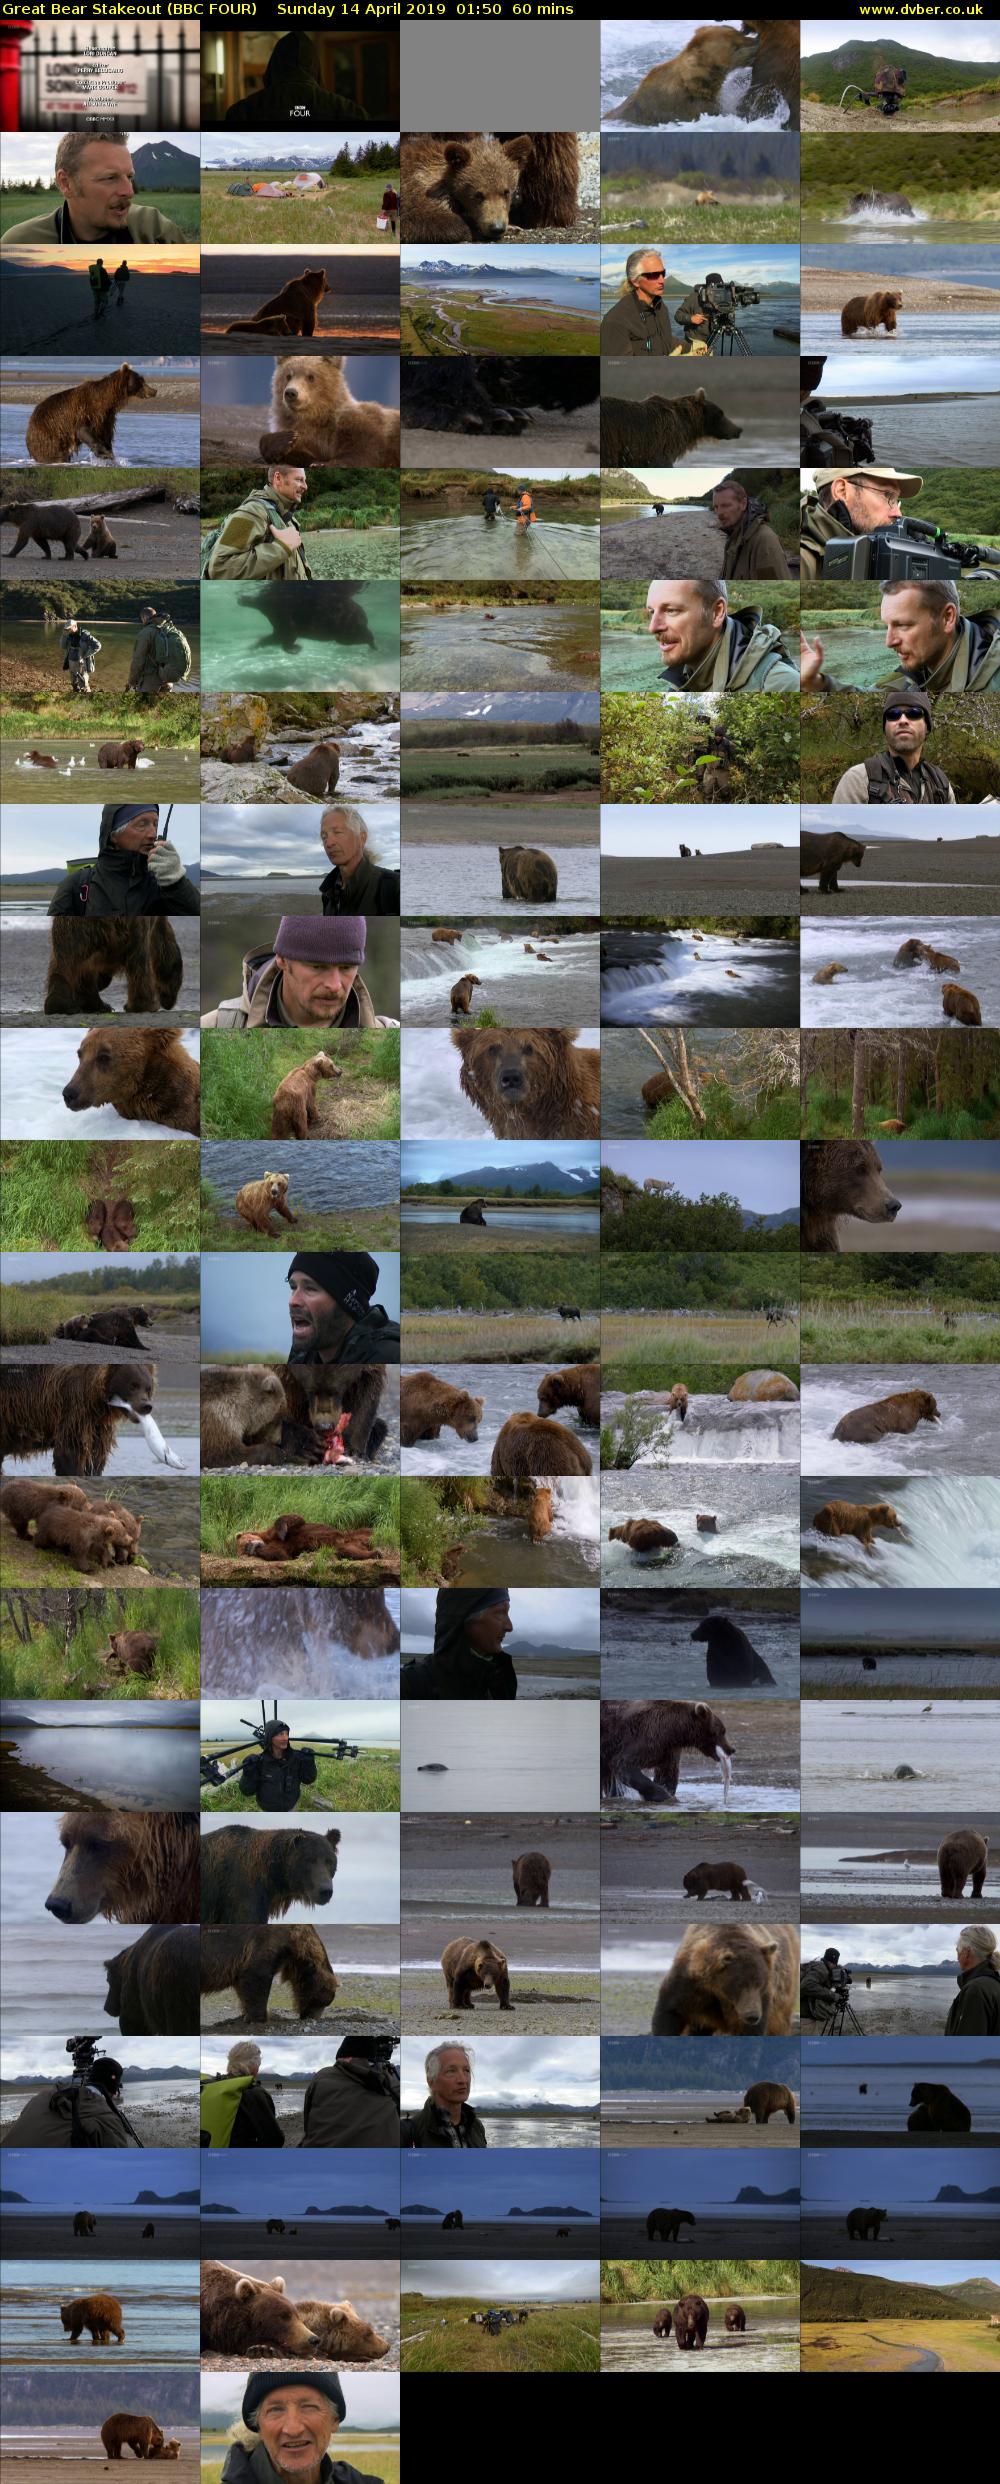 Great Bear Stakeout (BBC FOUR) Sunday 14 April 2019 01:50 - 02:50